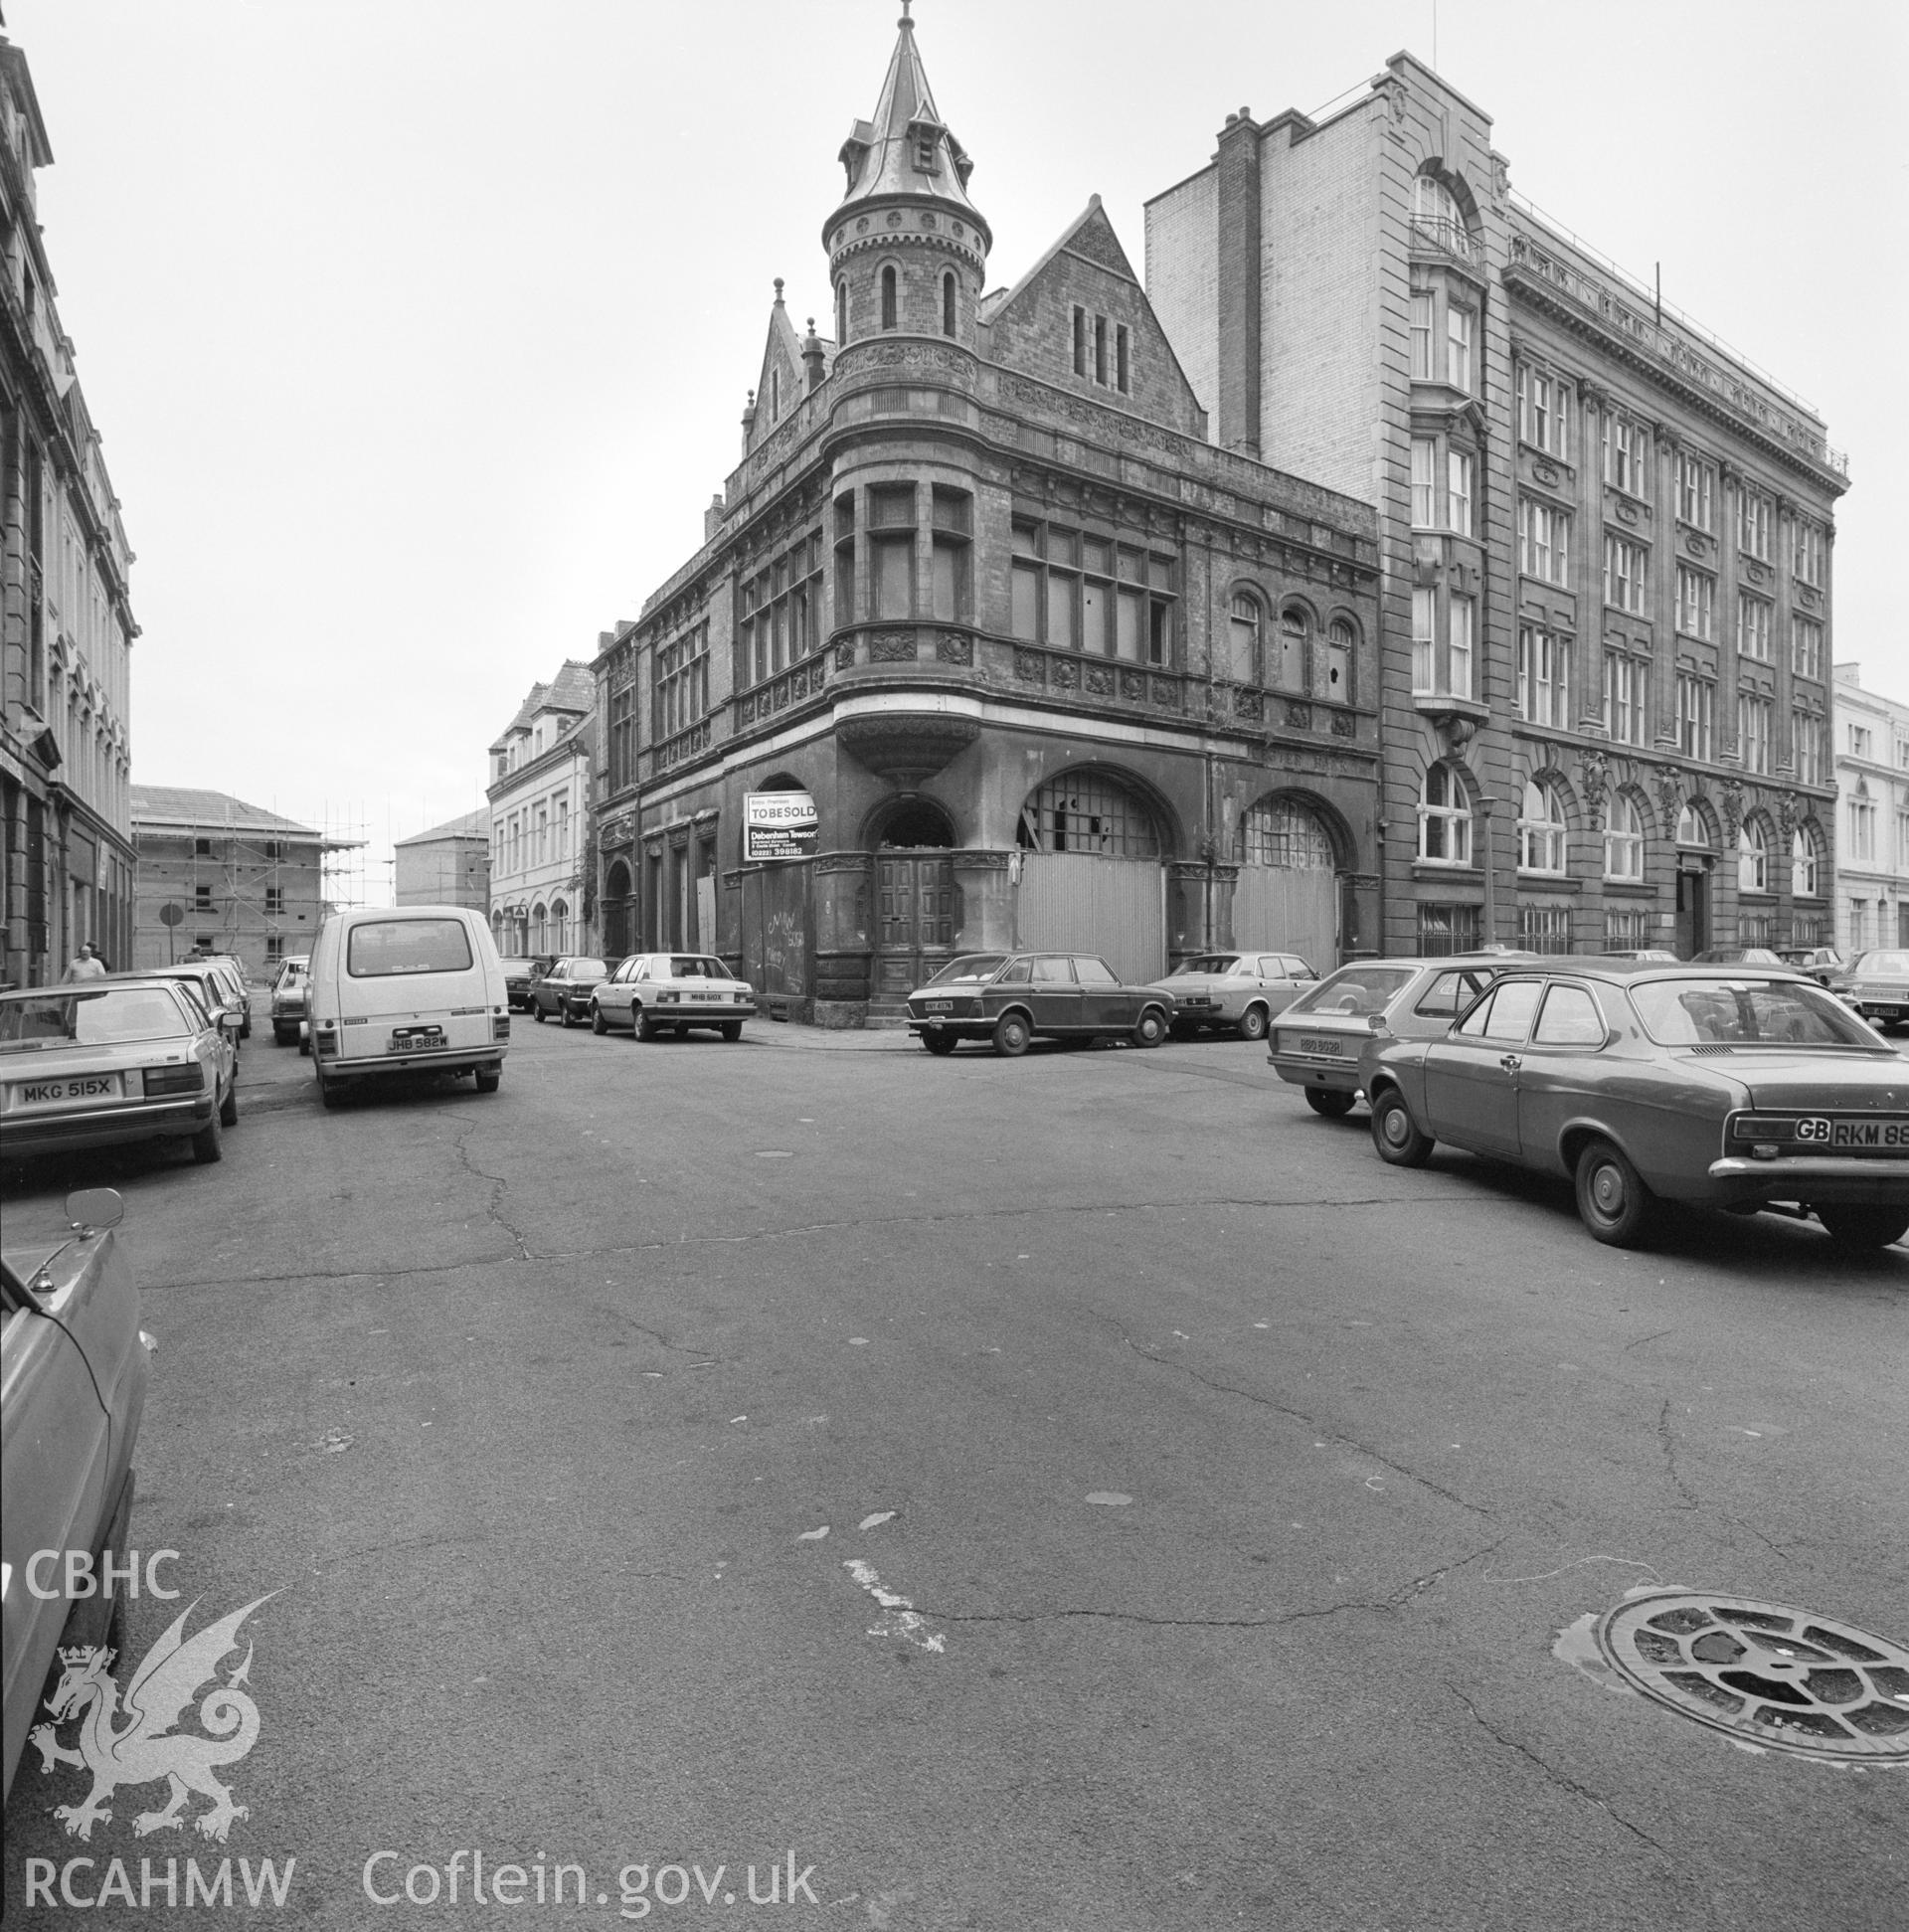 Digital copy of a black and white negative showing a view of Gloucester Chambers, Mount Stuart Square, Cardiff.